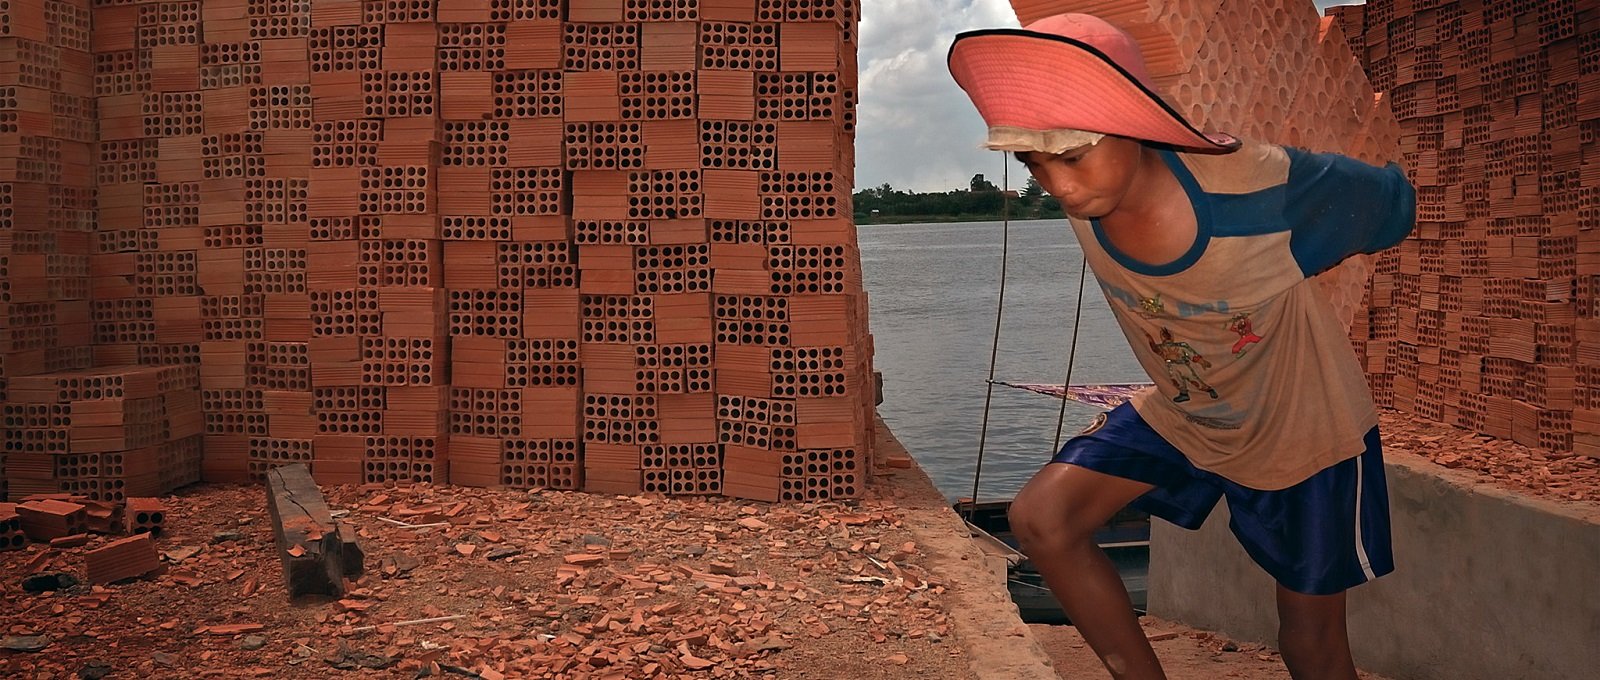 Here’s how we make 2021, the International Year for the Elimination of Child Labour, count